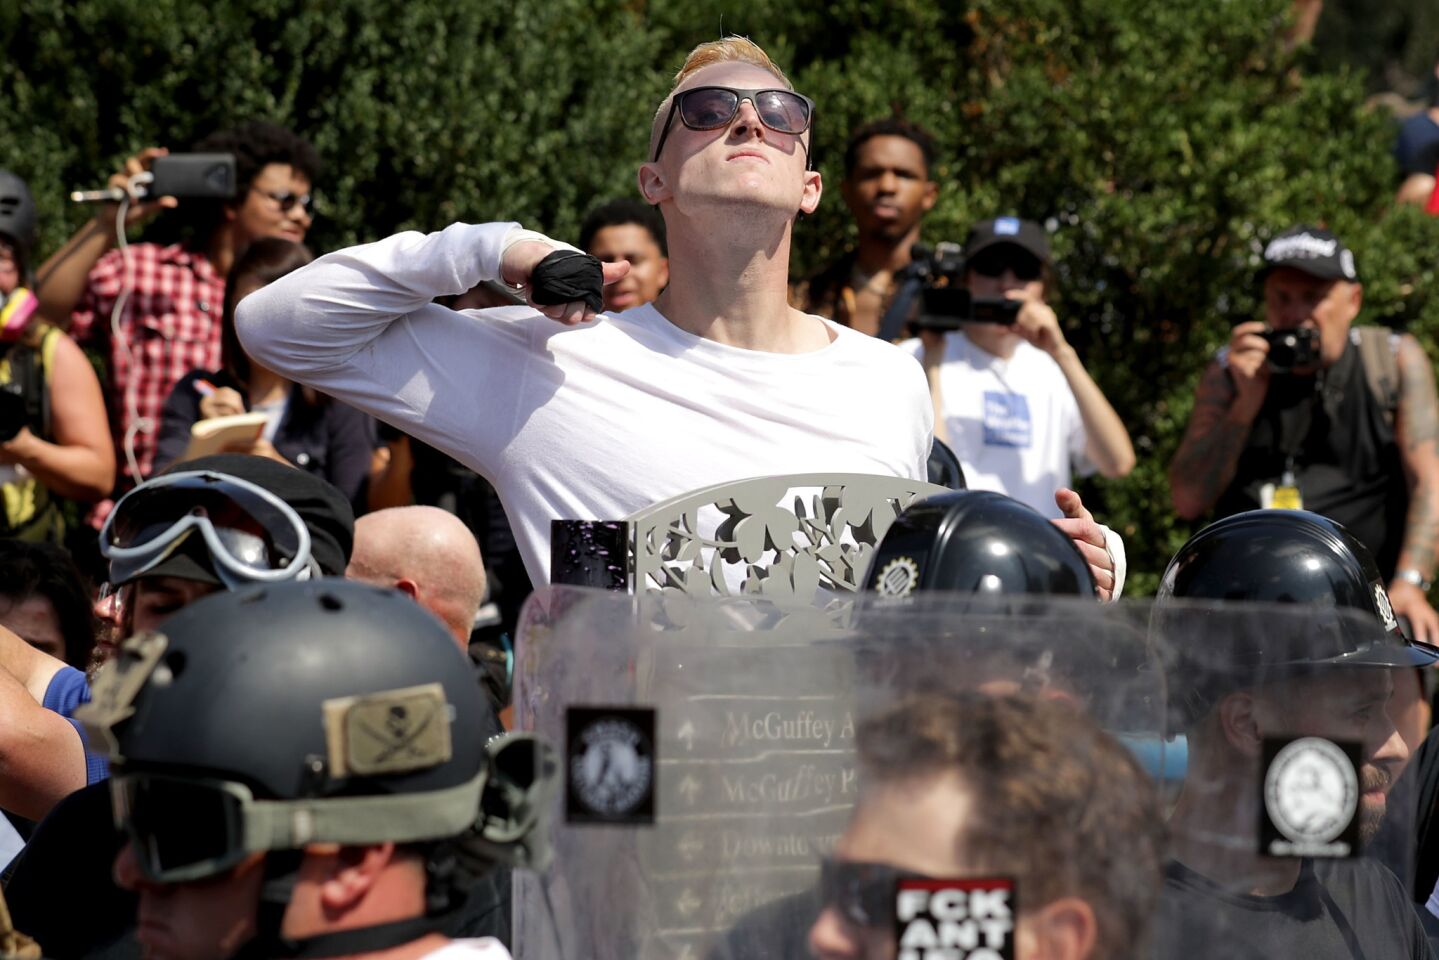 A man makes a slashing motion across his throat toward counter-protesters while marching with other white nationalists, neo-Nazis and members of the "alt-right" during a rally in Charlottesville, Va.